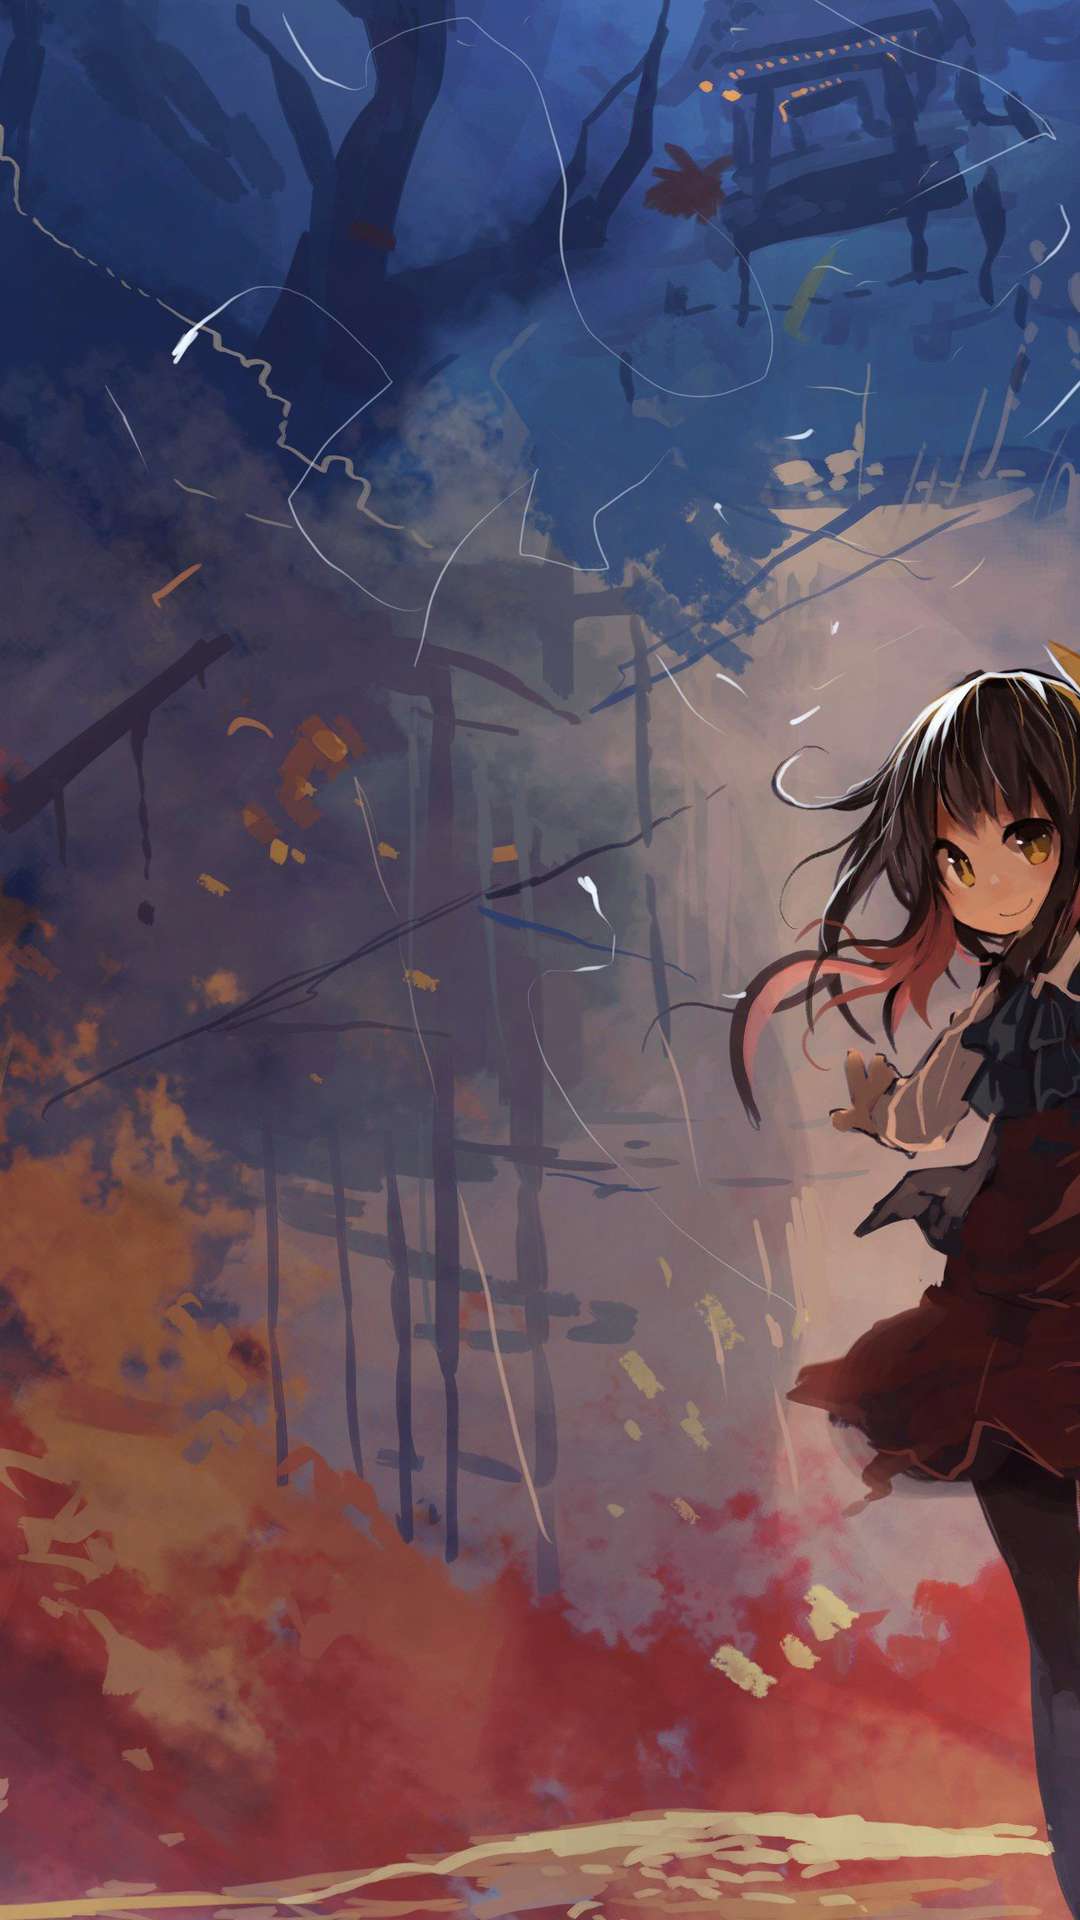 3+ Fall Anime Wallpapers for iPhone and Android by Amy Barrett